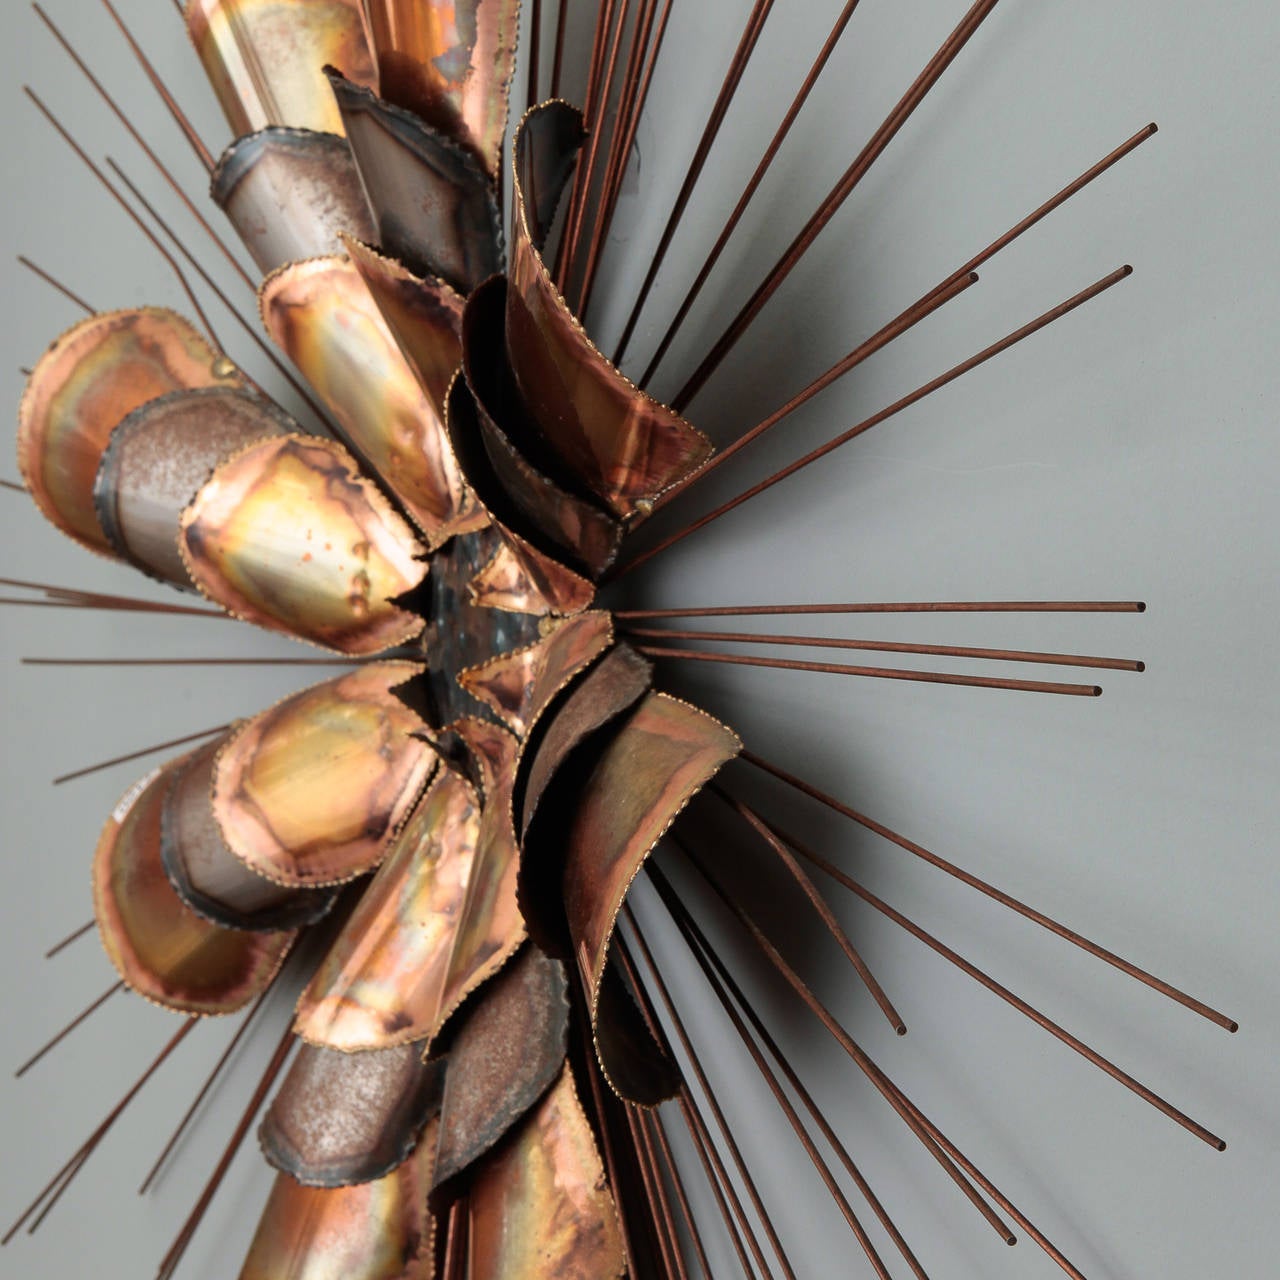 Circa 1970s large, brutalist style sunburst wall sculpture in copper and metal designed by artists Curtis Freiler and Jerry Felsby whose work is signed C. Jere or Curtis Jere and manufactured by Artisan House.